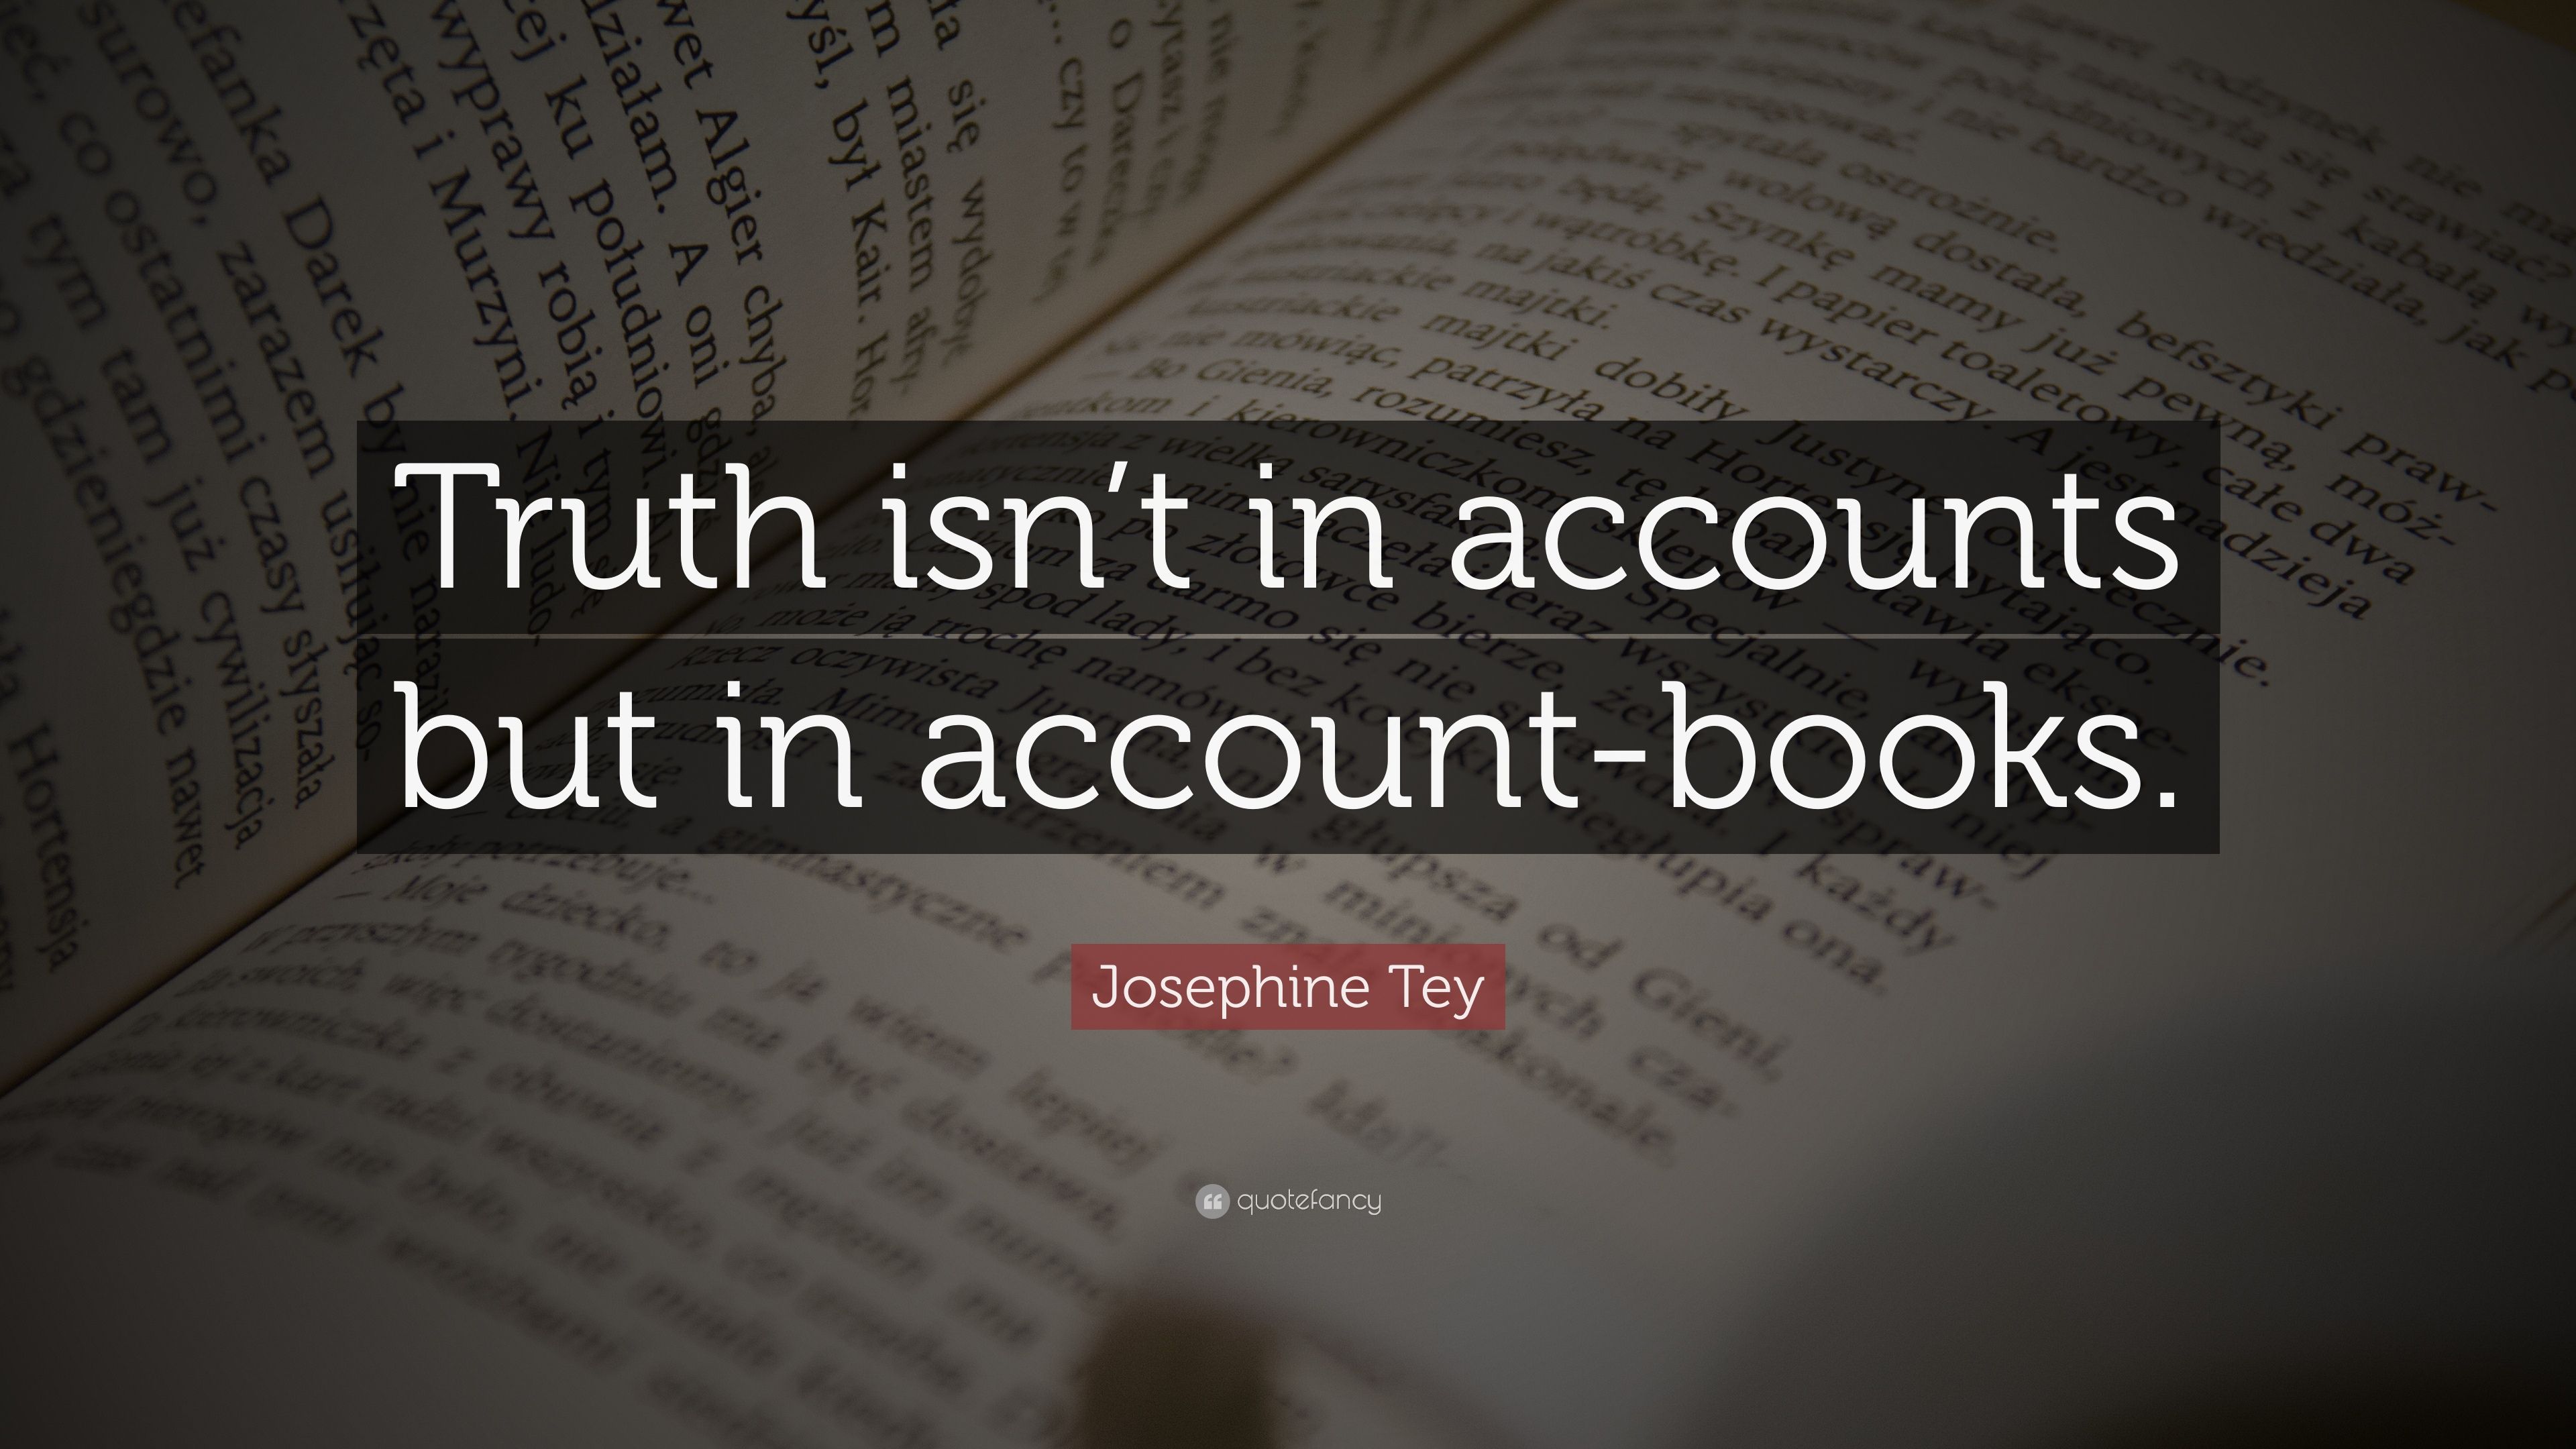 Josephine Tey Quote: “Truth Isn't In Accounts But In Account Books.” (12 Wallpaper)